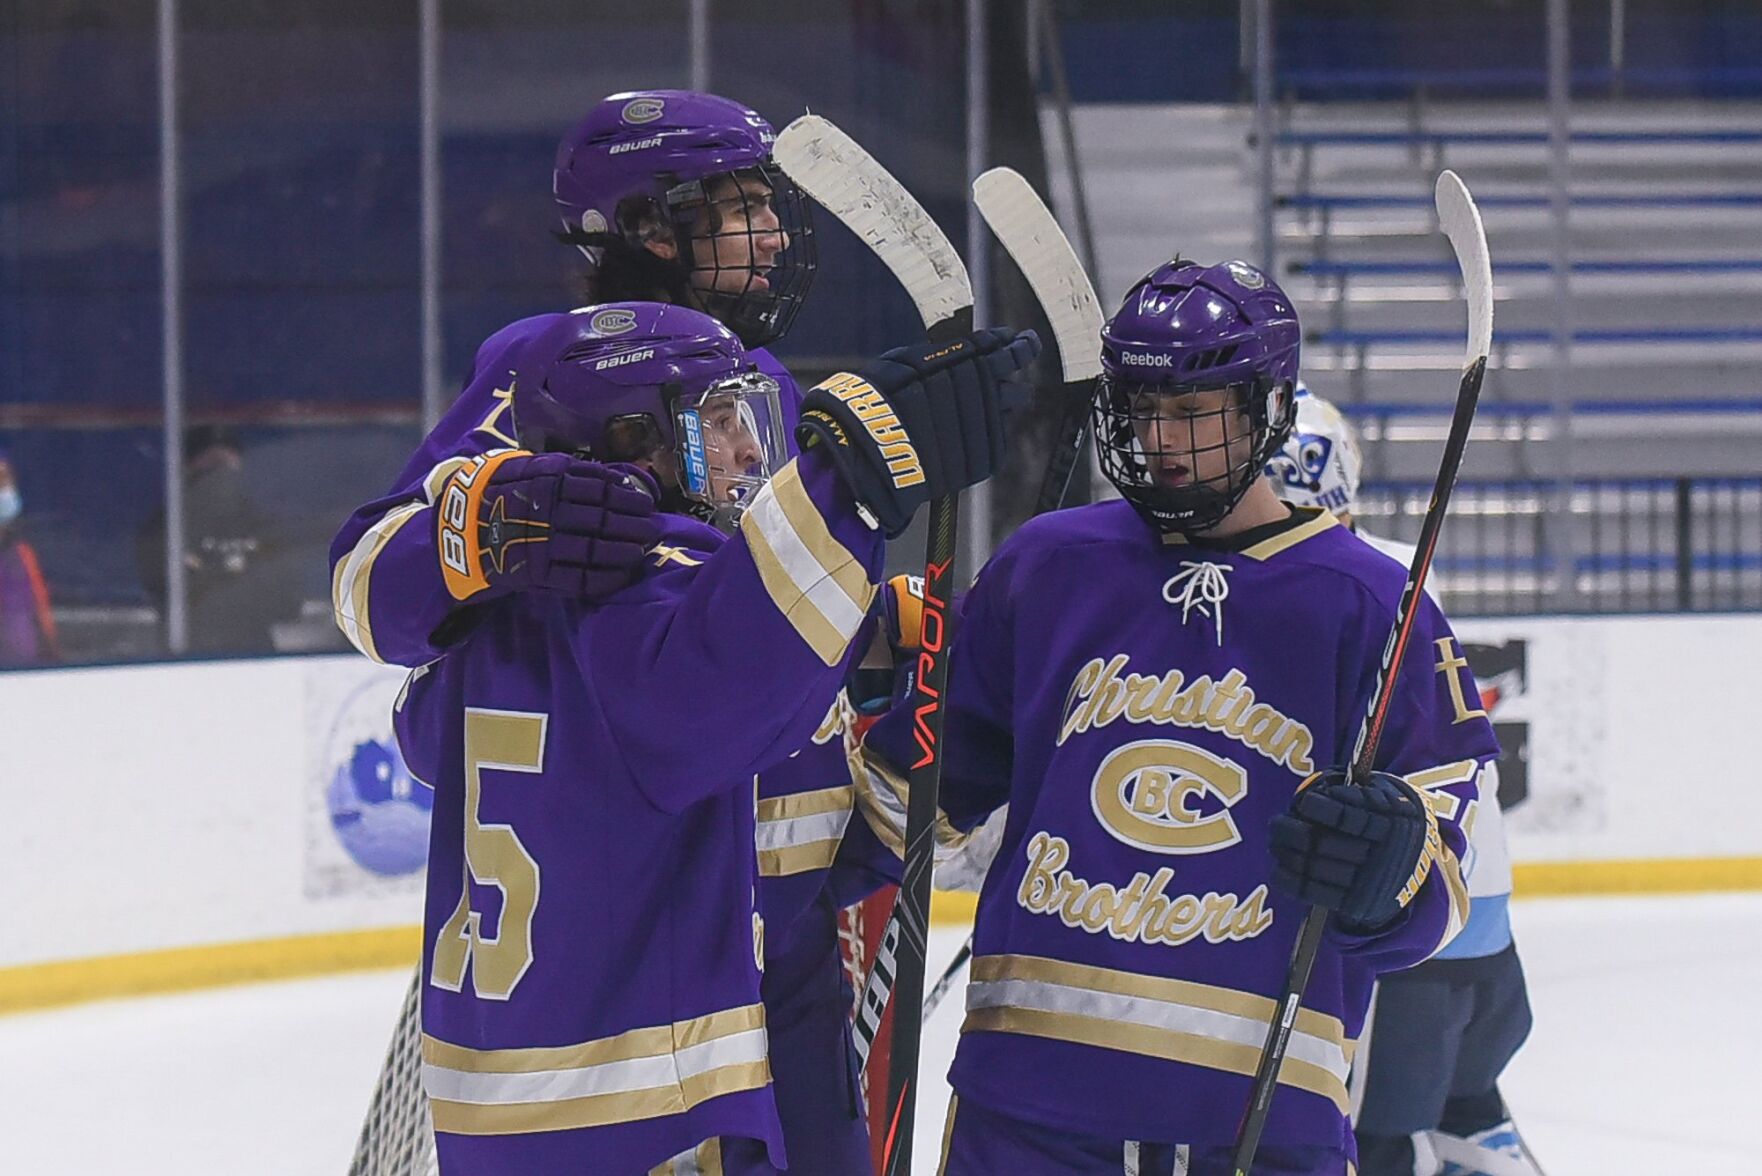 Familiar linemates push the pace for CBC in victory against SLUH